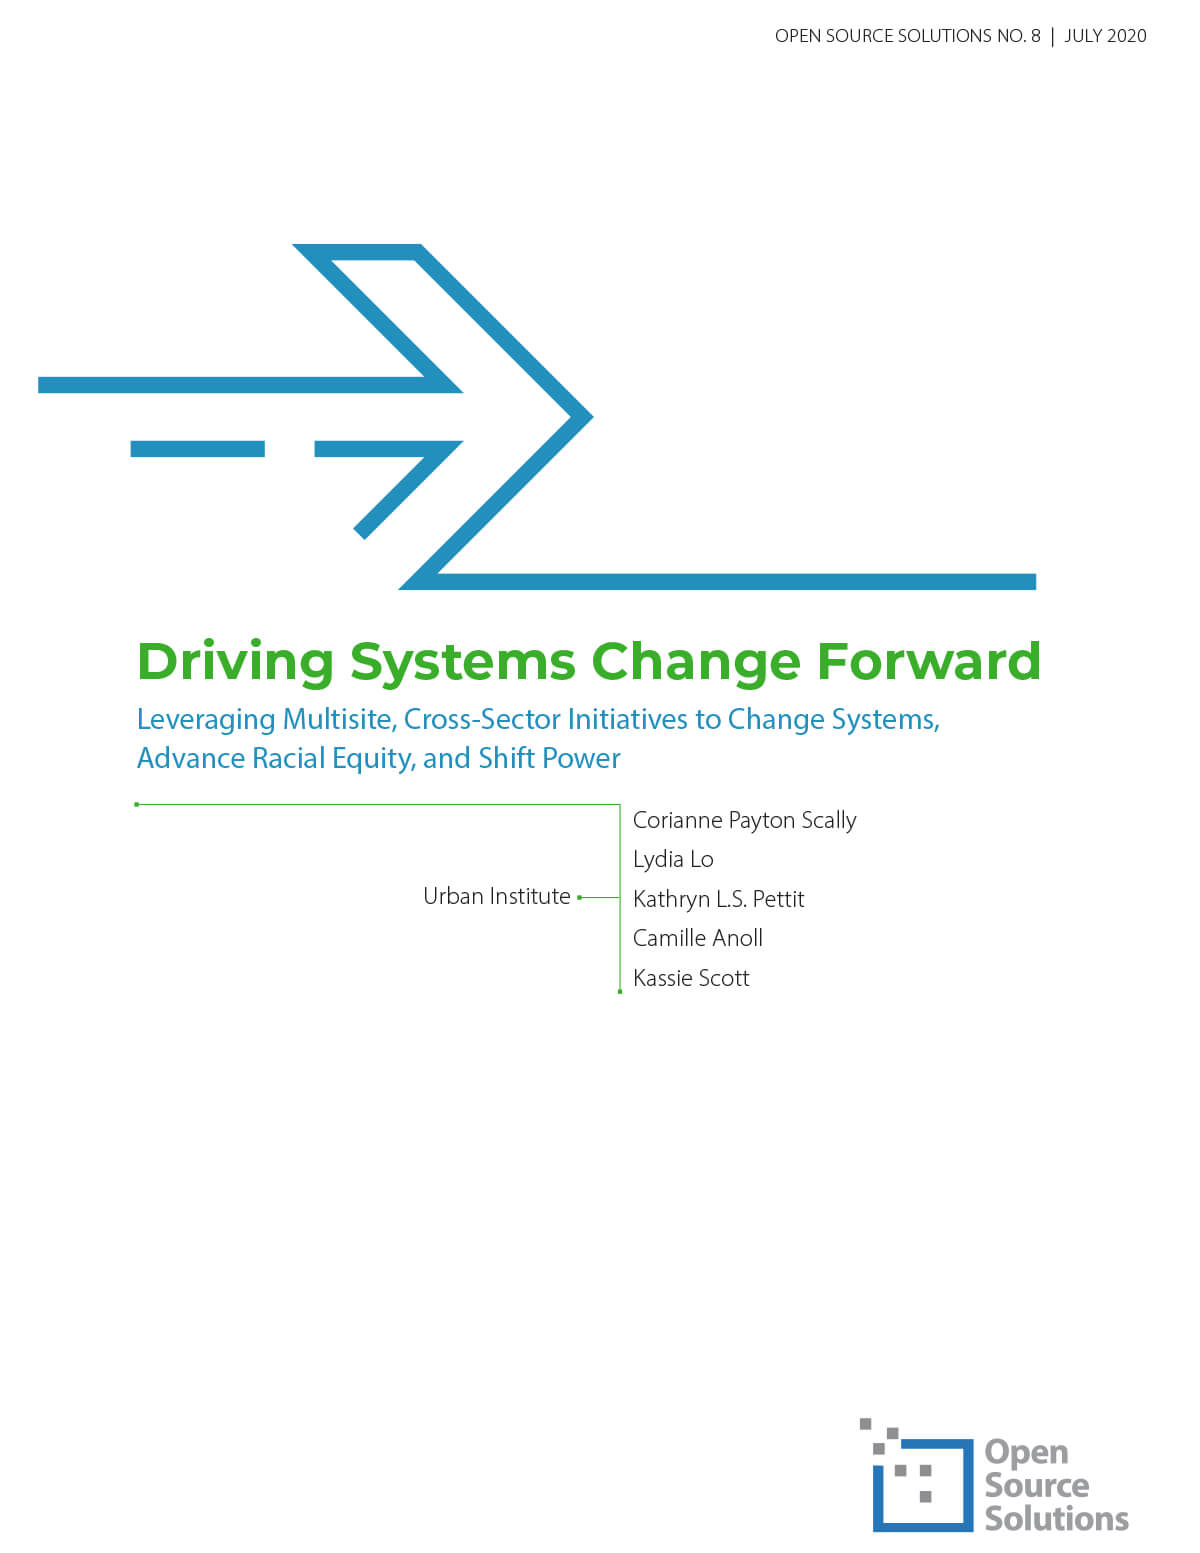 Driving Systems Change Forward: Leveraging Multisite, Cross-Sector Initiatives to Change Systems, Advance Racial Equity, and Shift Power - Urban Institute